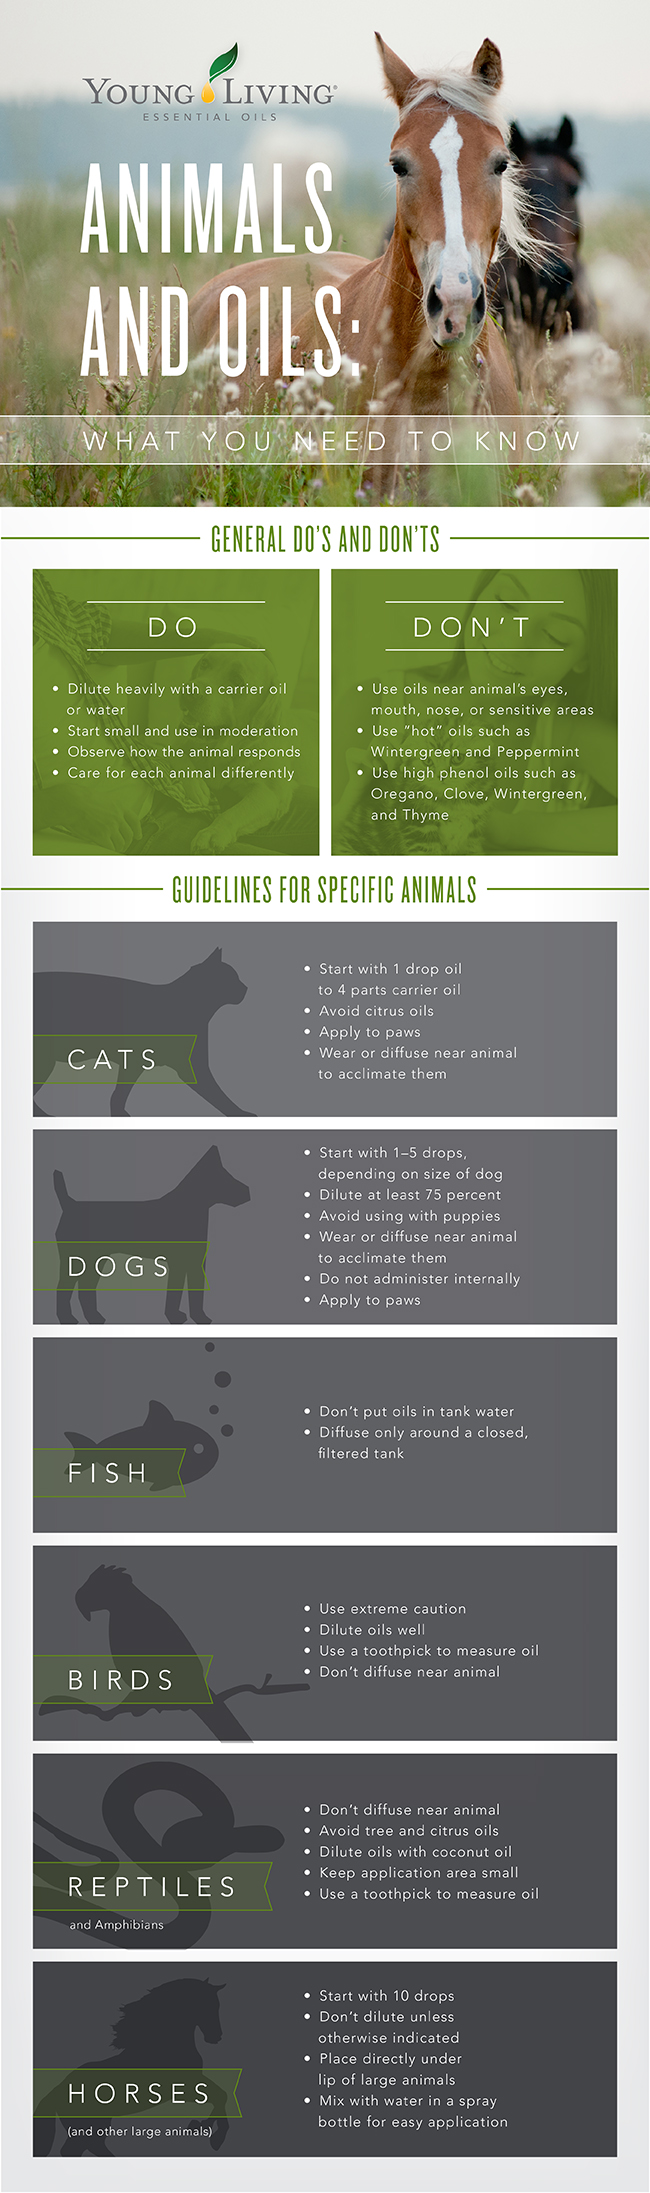 Pets and Animals Infographic - Young Living